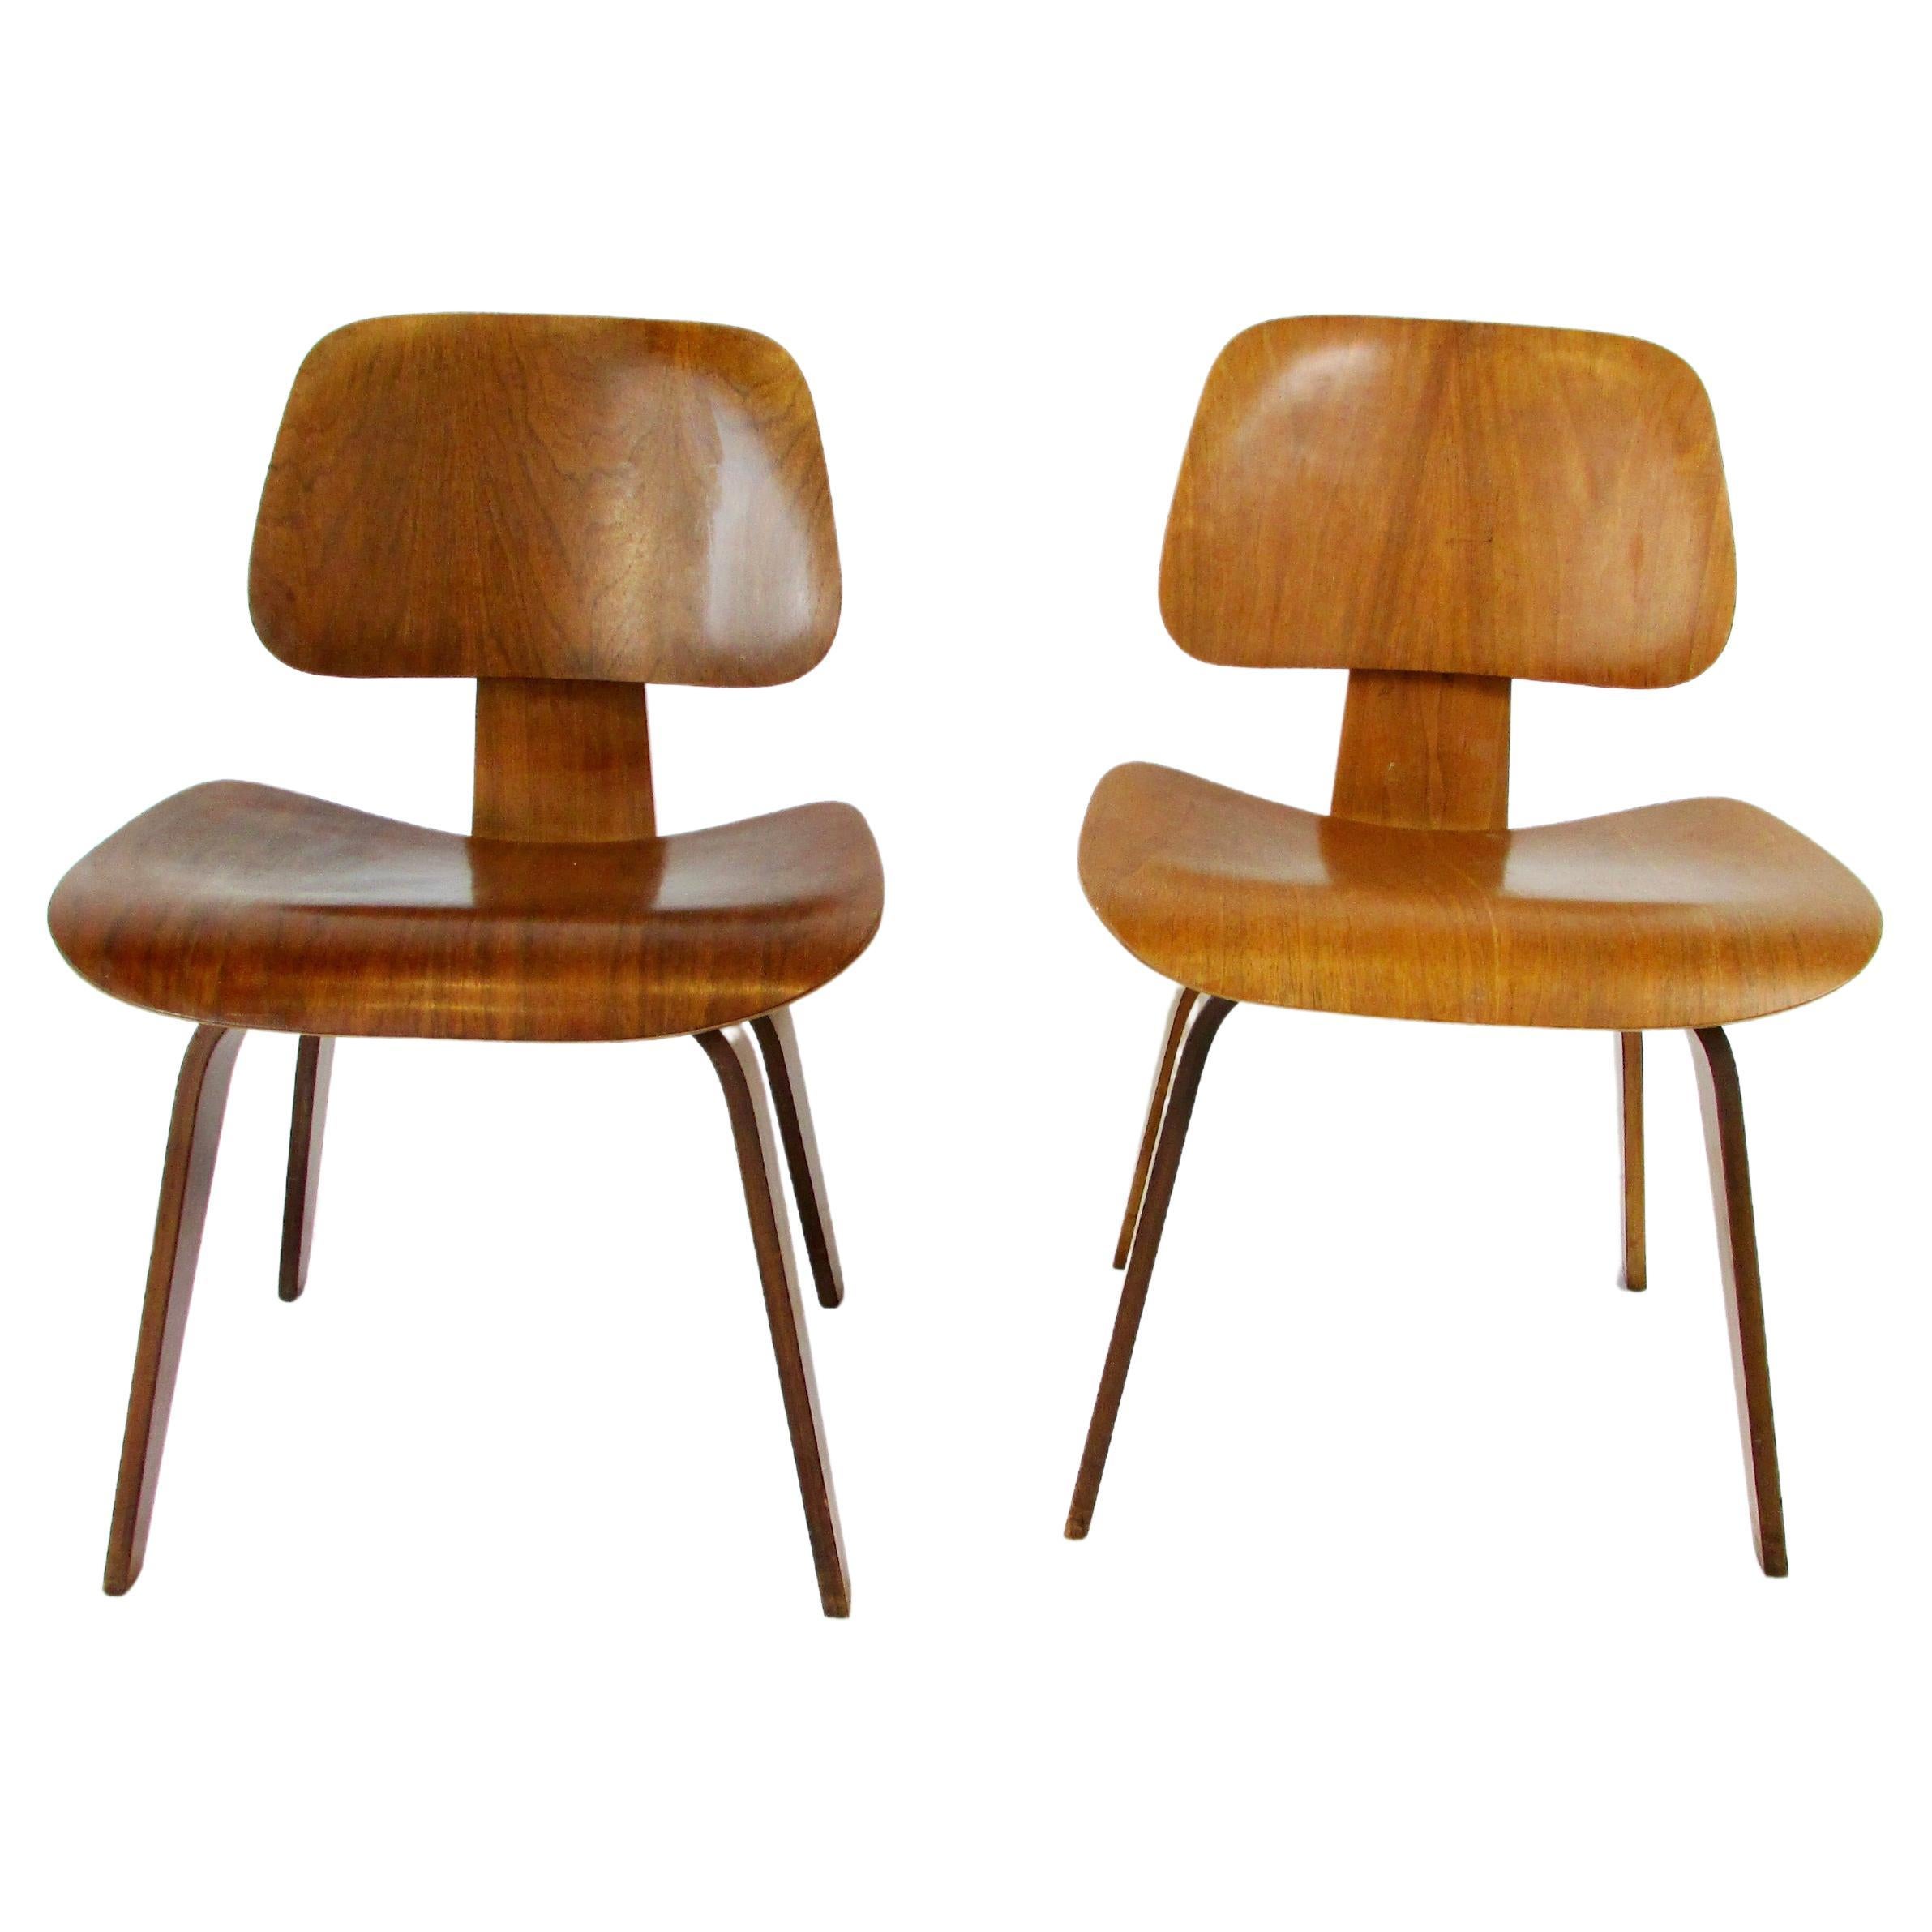 Two Charles and Ray Eames Herman Miller DCW chairs For Sale